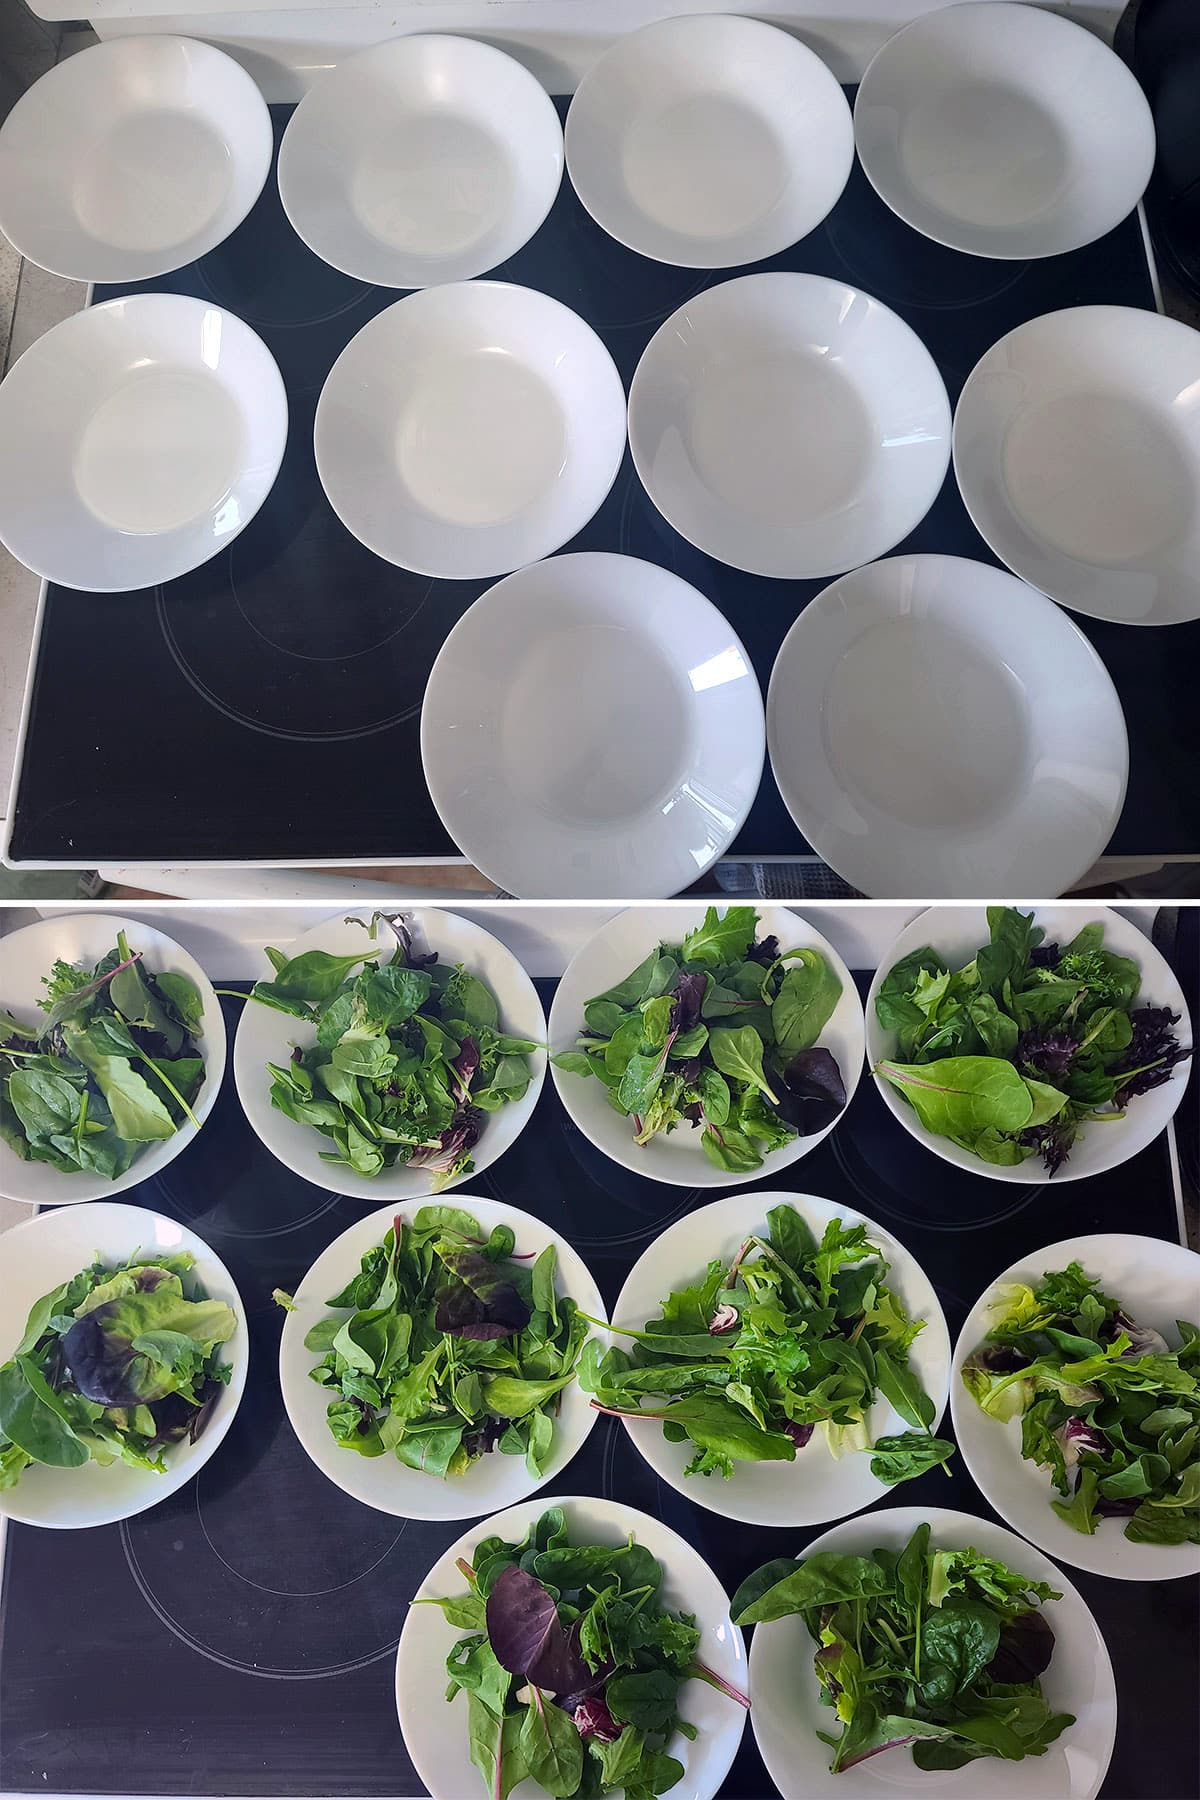 A 2 part image showing 10 empty white bowls, then the same bowls with salad greens in them.